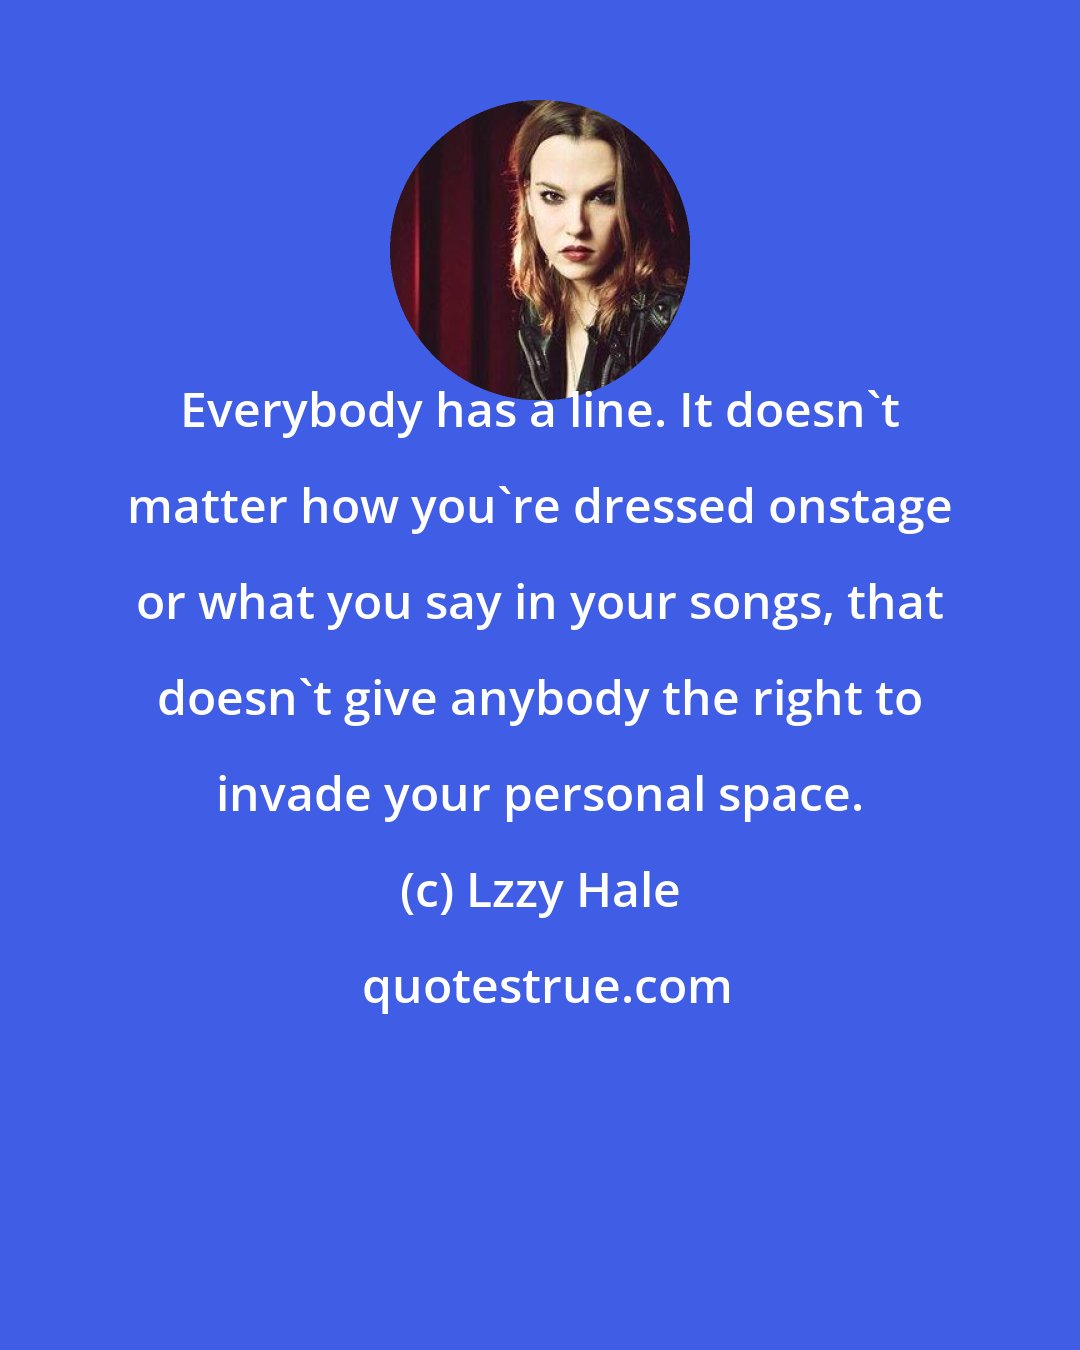 Lzzy Hale: Everybody has a line. It doesn't matter how you're dressed onstage or what you say in your songs, that doesn't give anybody the right to invade your personal space.